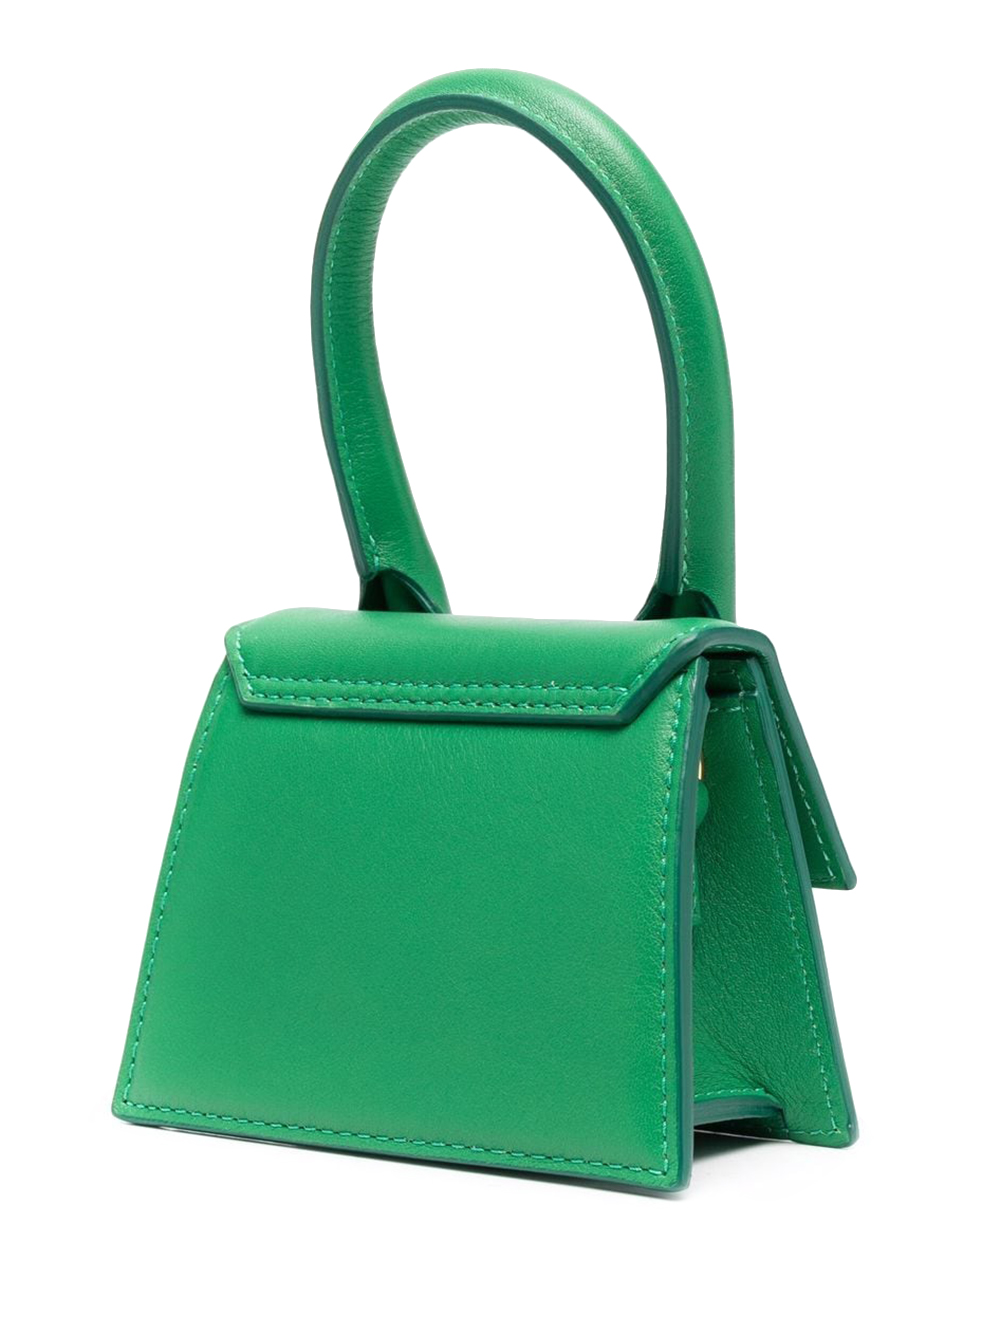 Jacquemus Le Chiquito Top-Handle Bag Mini Green in Leather with 